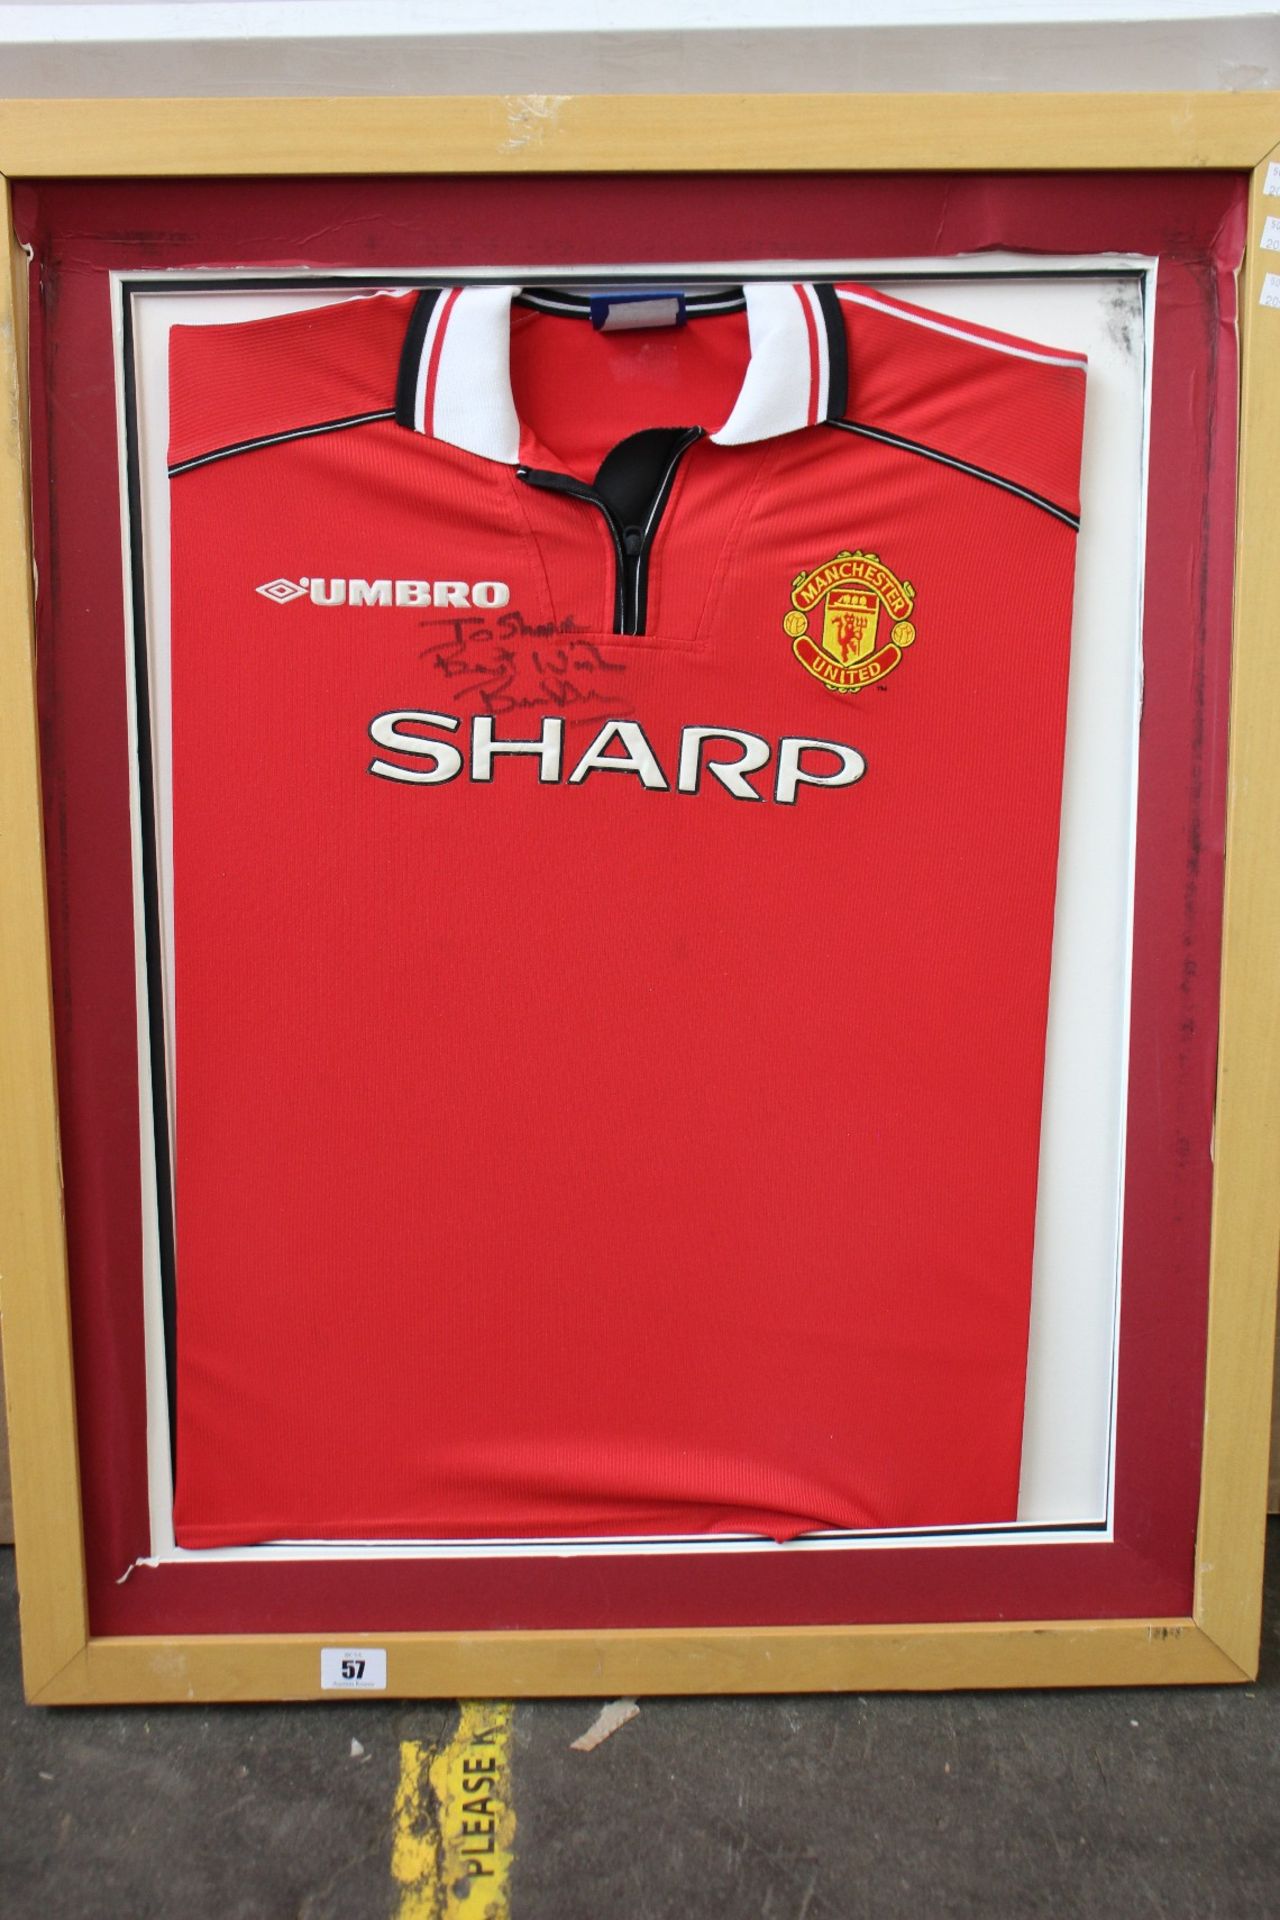 A pre-owned Brian Robson signed Man United football shirt (Item in a damaged frame, may be